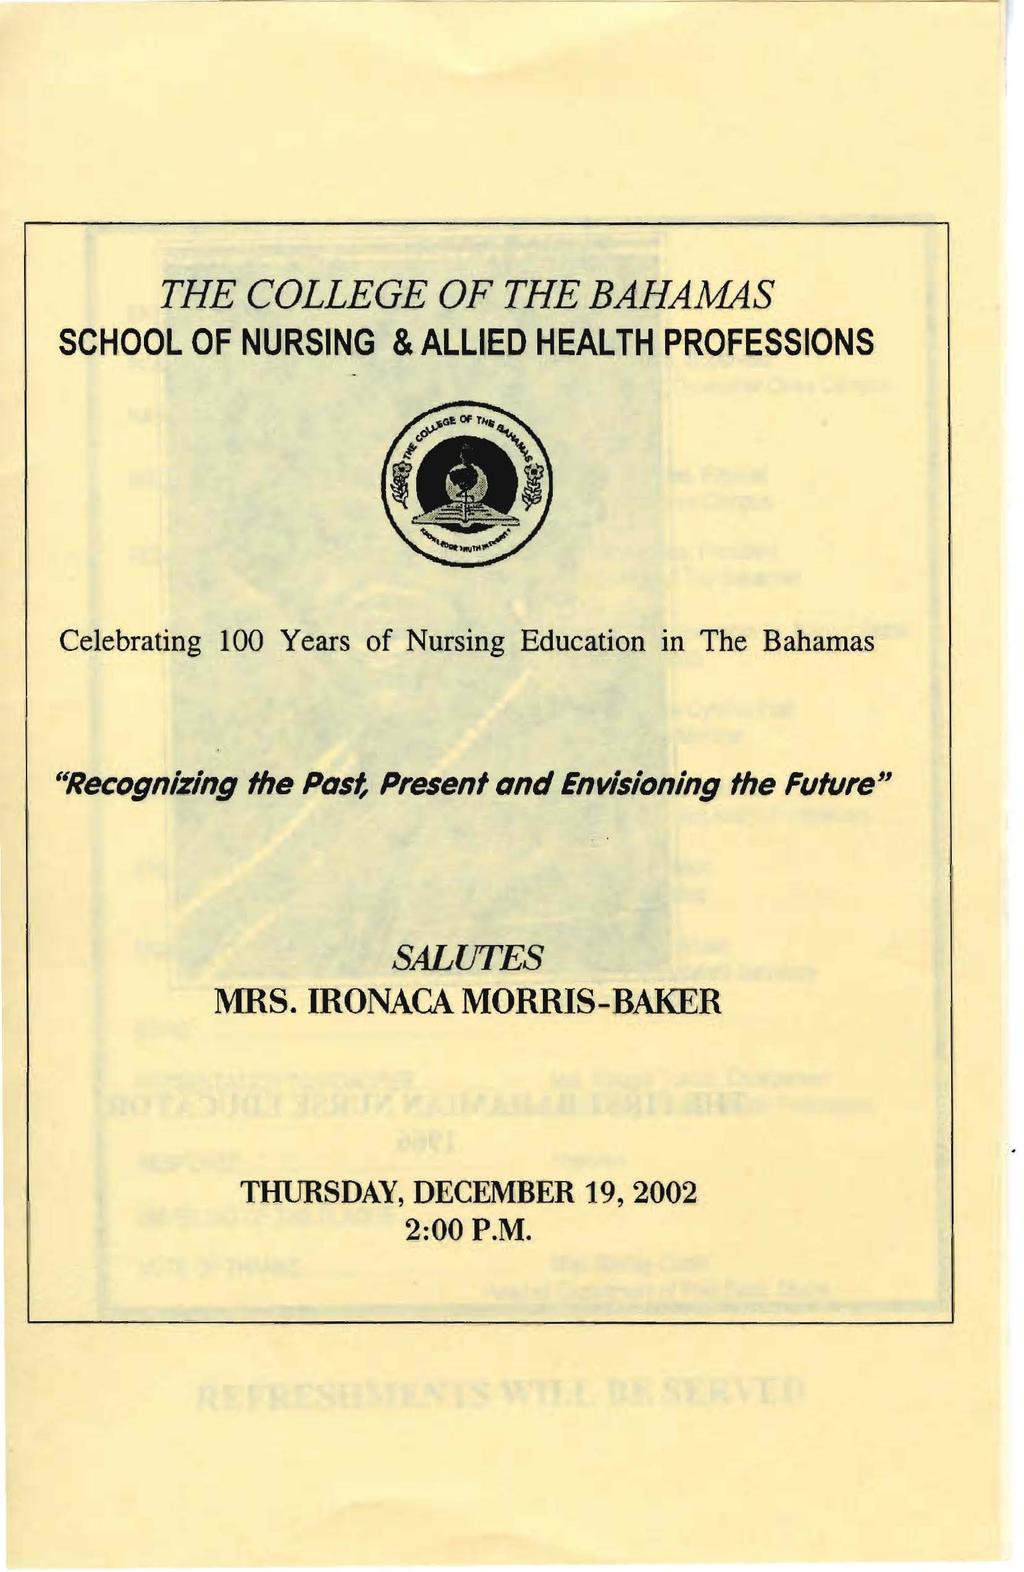 THE COLLEGE OF THE BAHAMAS SCHOOL OF NURSING &ALLIED HEALTH PROFESSIONS Celebrating 100 Years of Nursing Education in The Bahamas